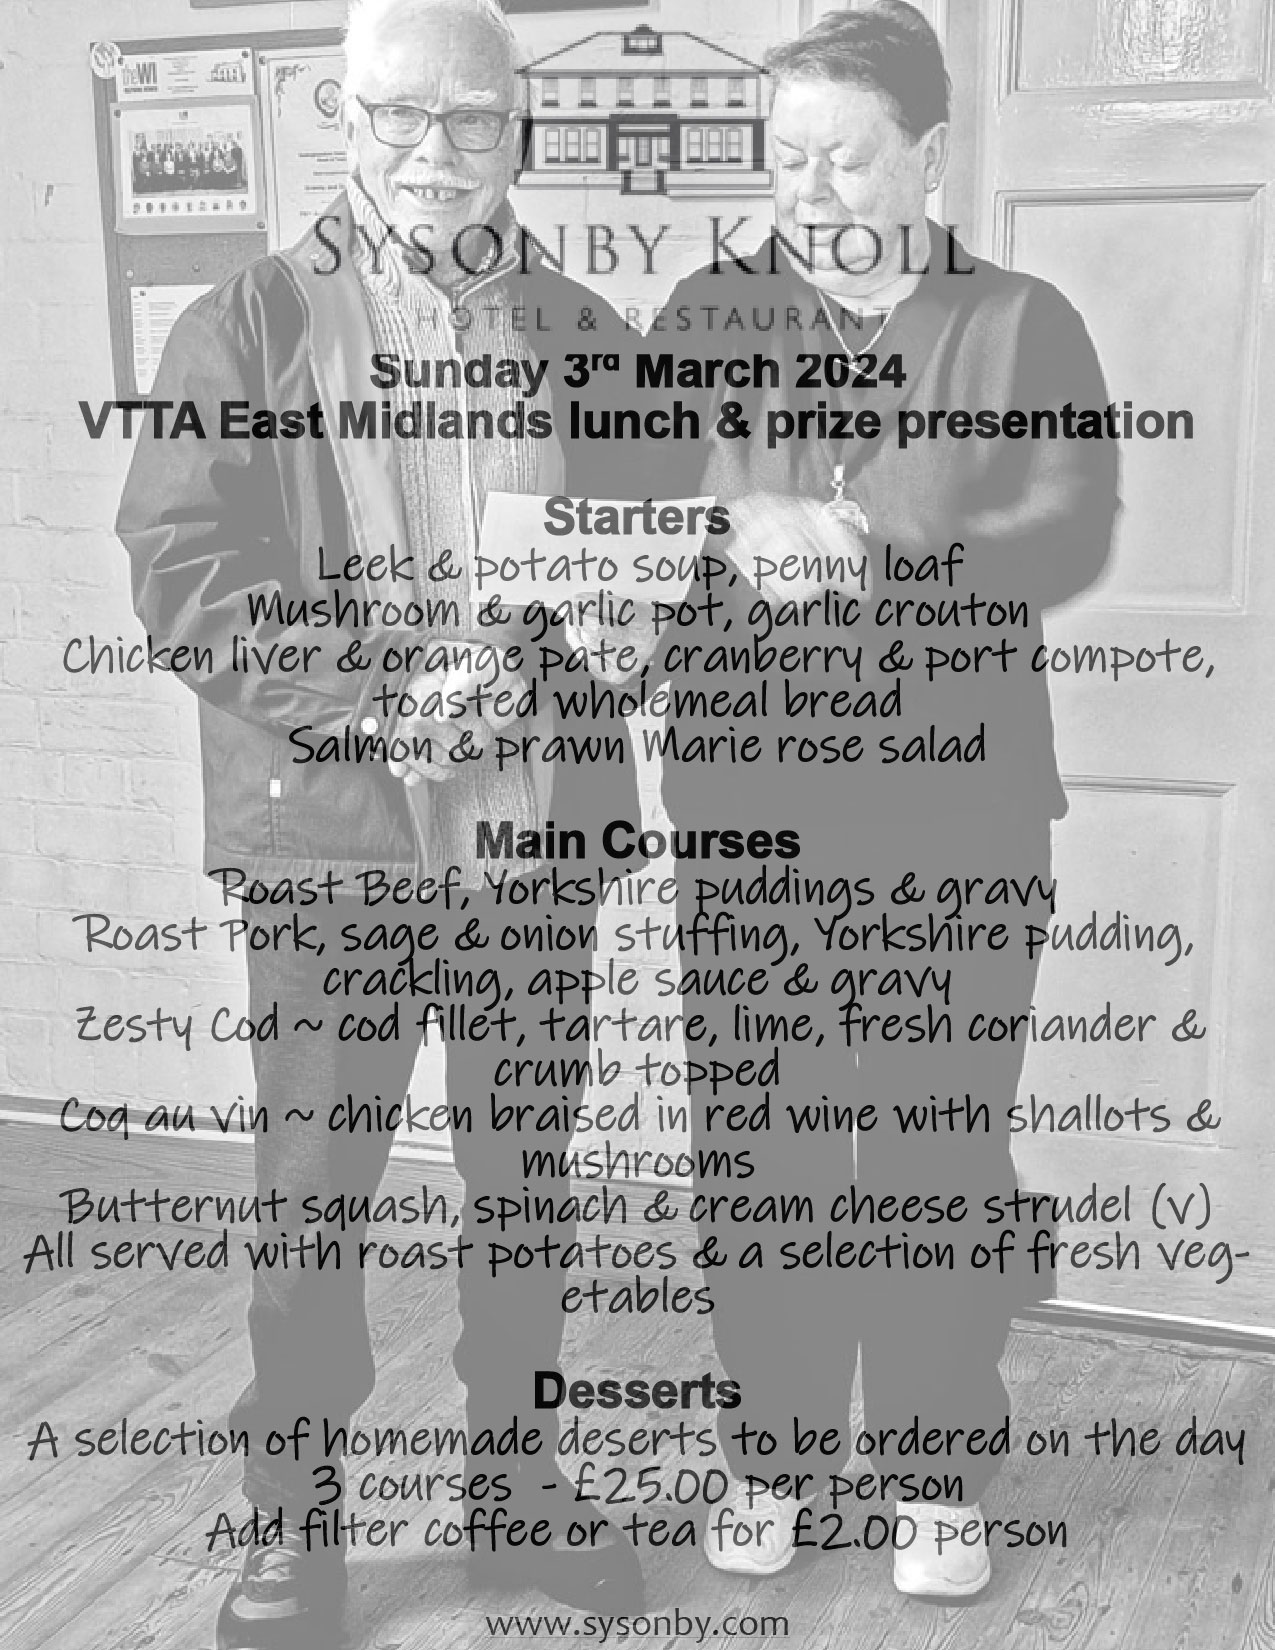 VTTA East Midlands - Group Luncheon and Prize Presentation - Sunday 3rd March 2024